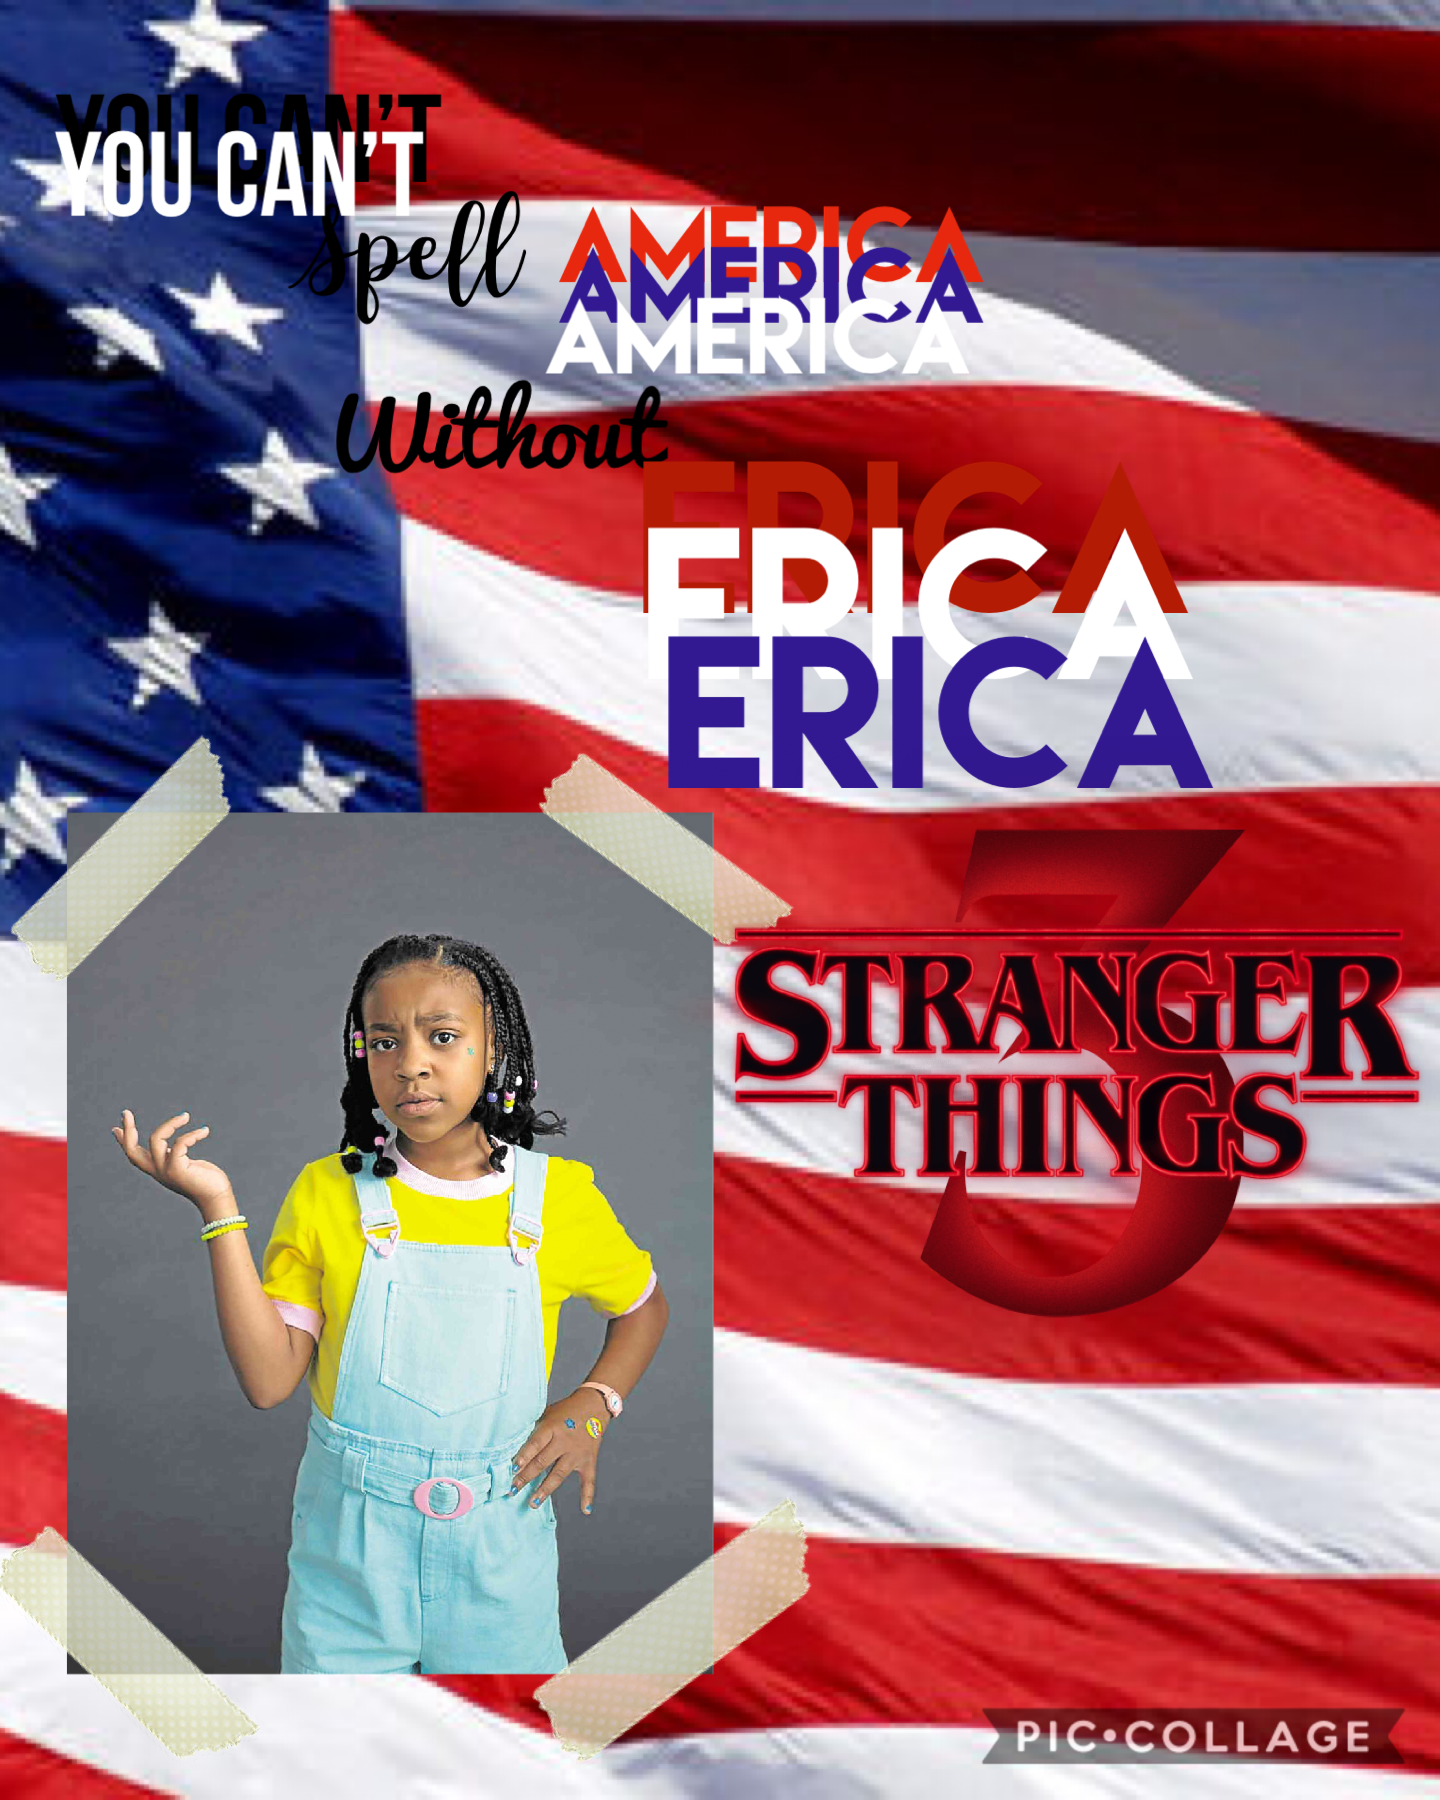 You can’t spell America without Erica🇺🇸